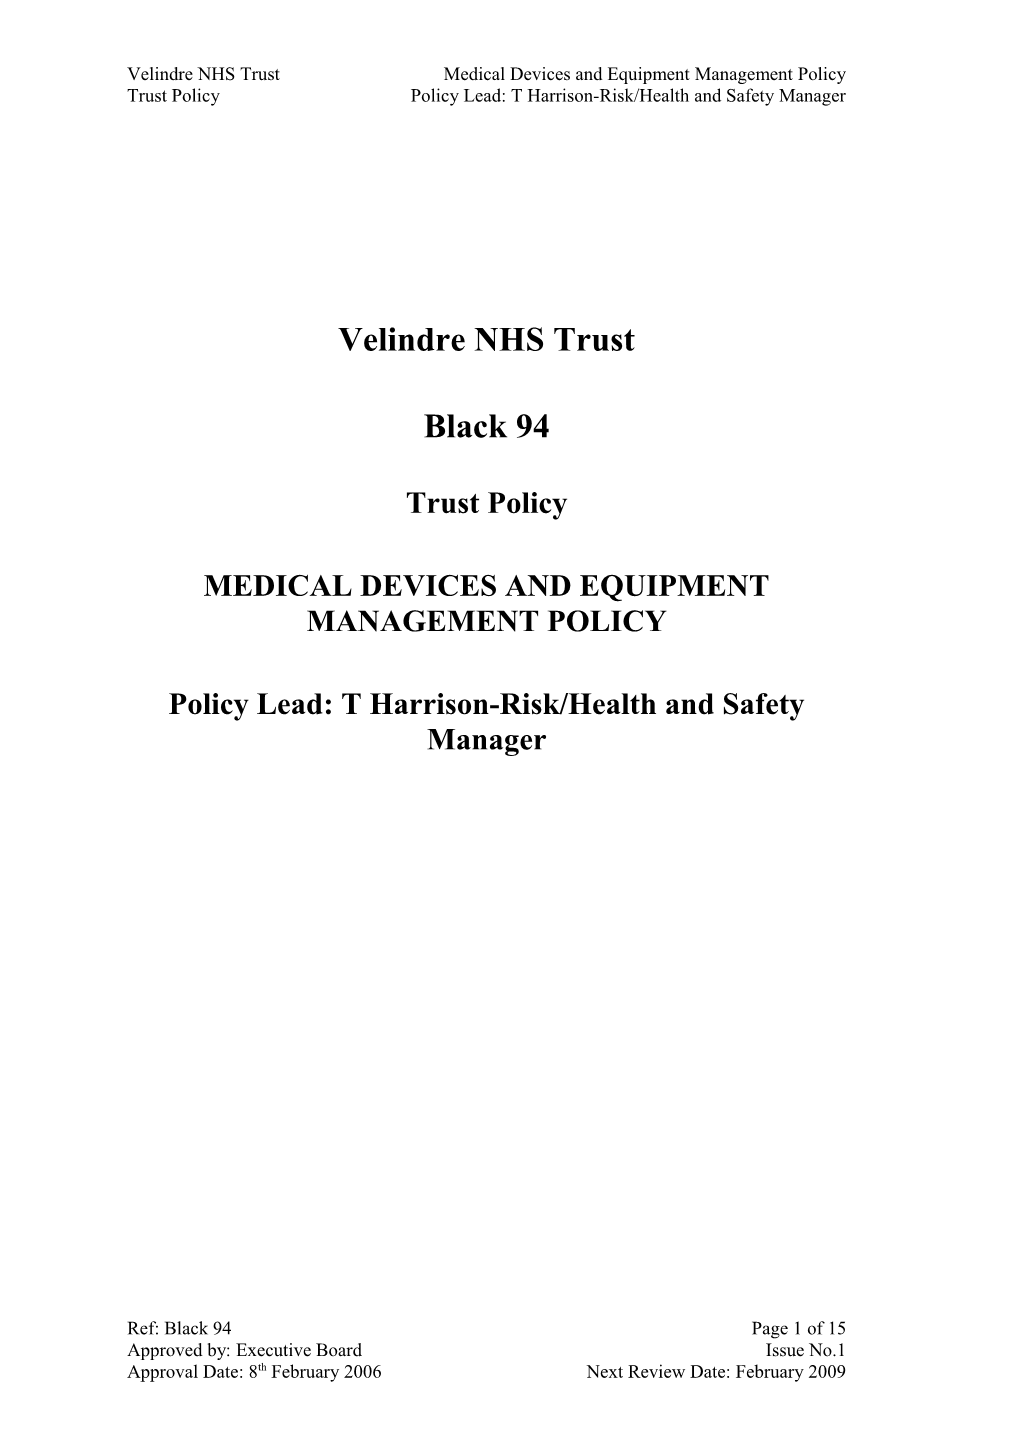 Medical Devices and Equipment Management Policy